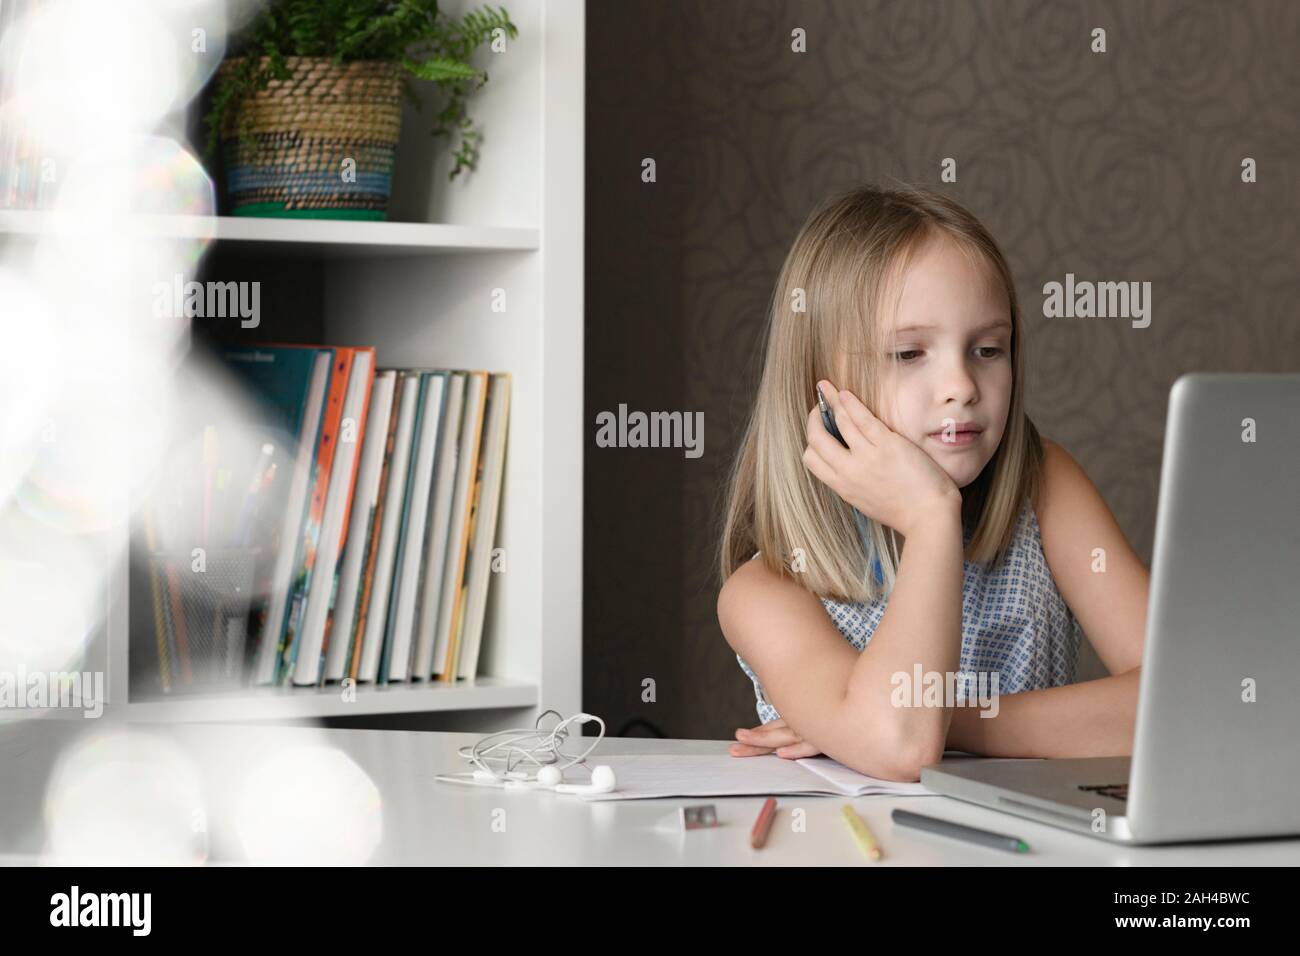 Girl sitting at table at home using laptop Stock Photo